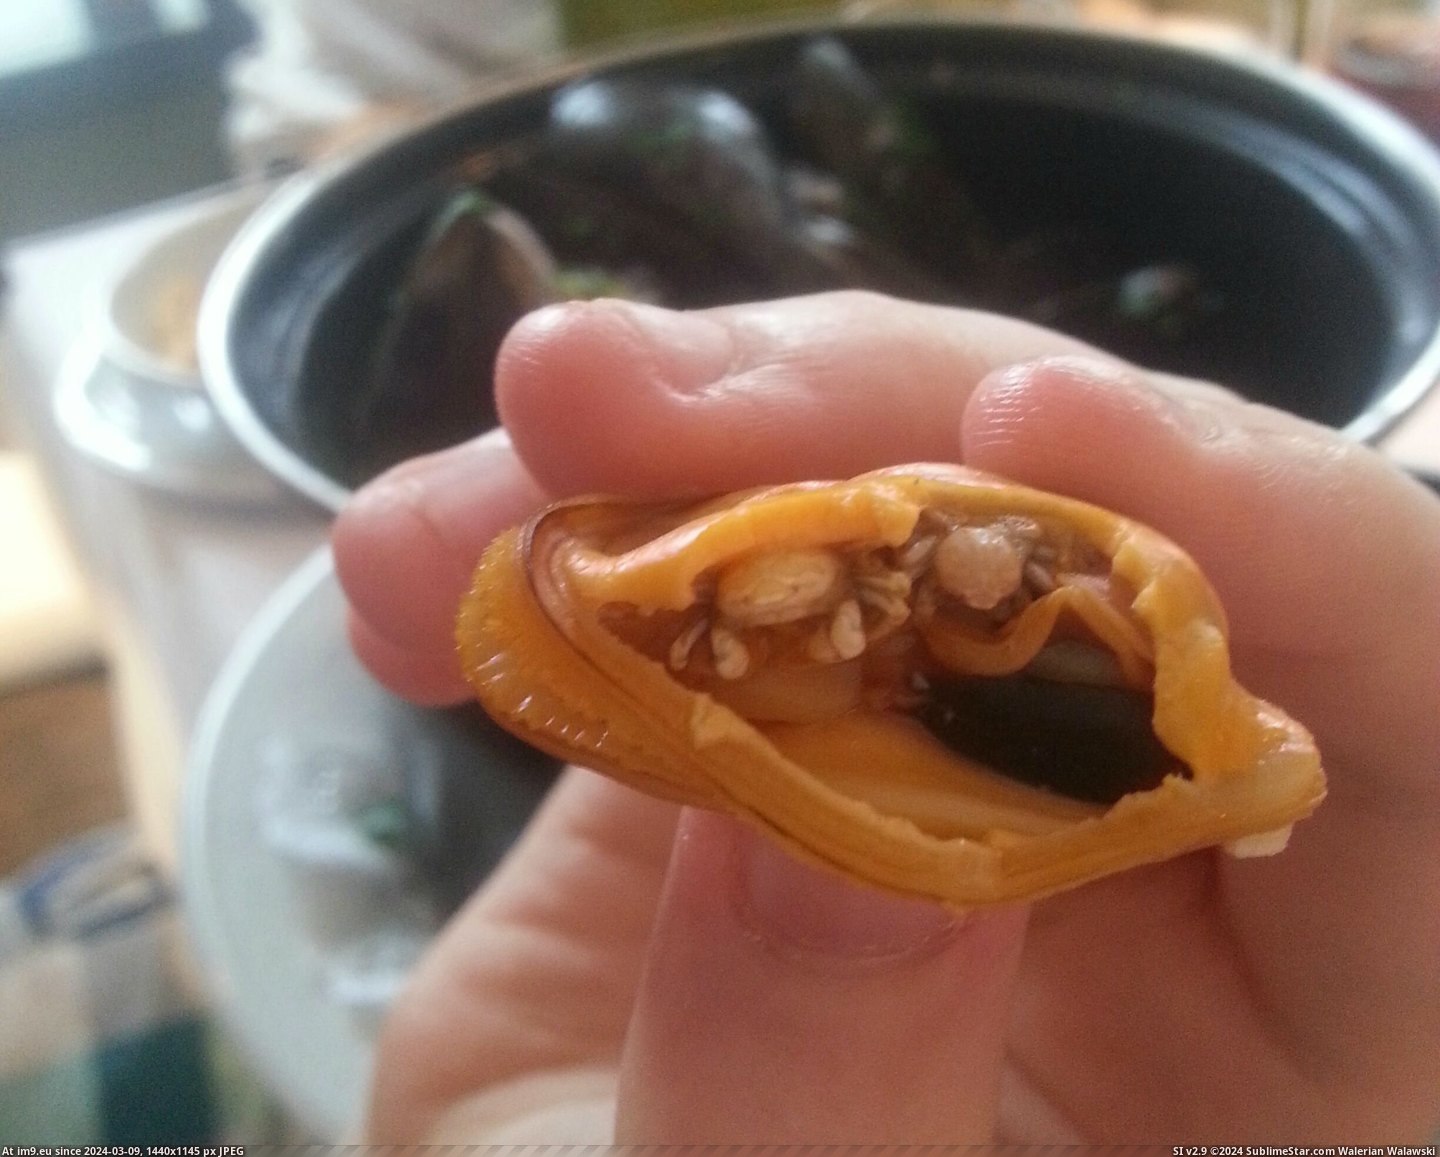 #Wtf #Two #Crabs #Mussel #Tiny #Eat [Wtf] Found two tiny crabs in the mussel I was about to eat Pic. (Изображение из альбом My r/WTF favs))